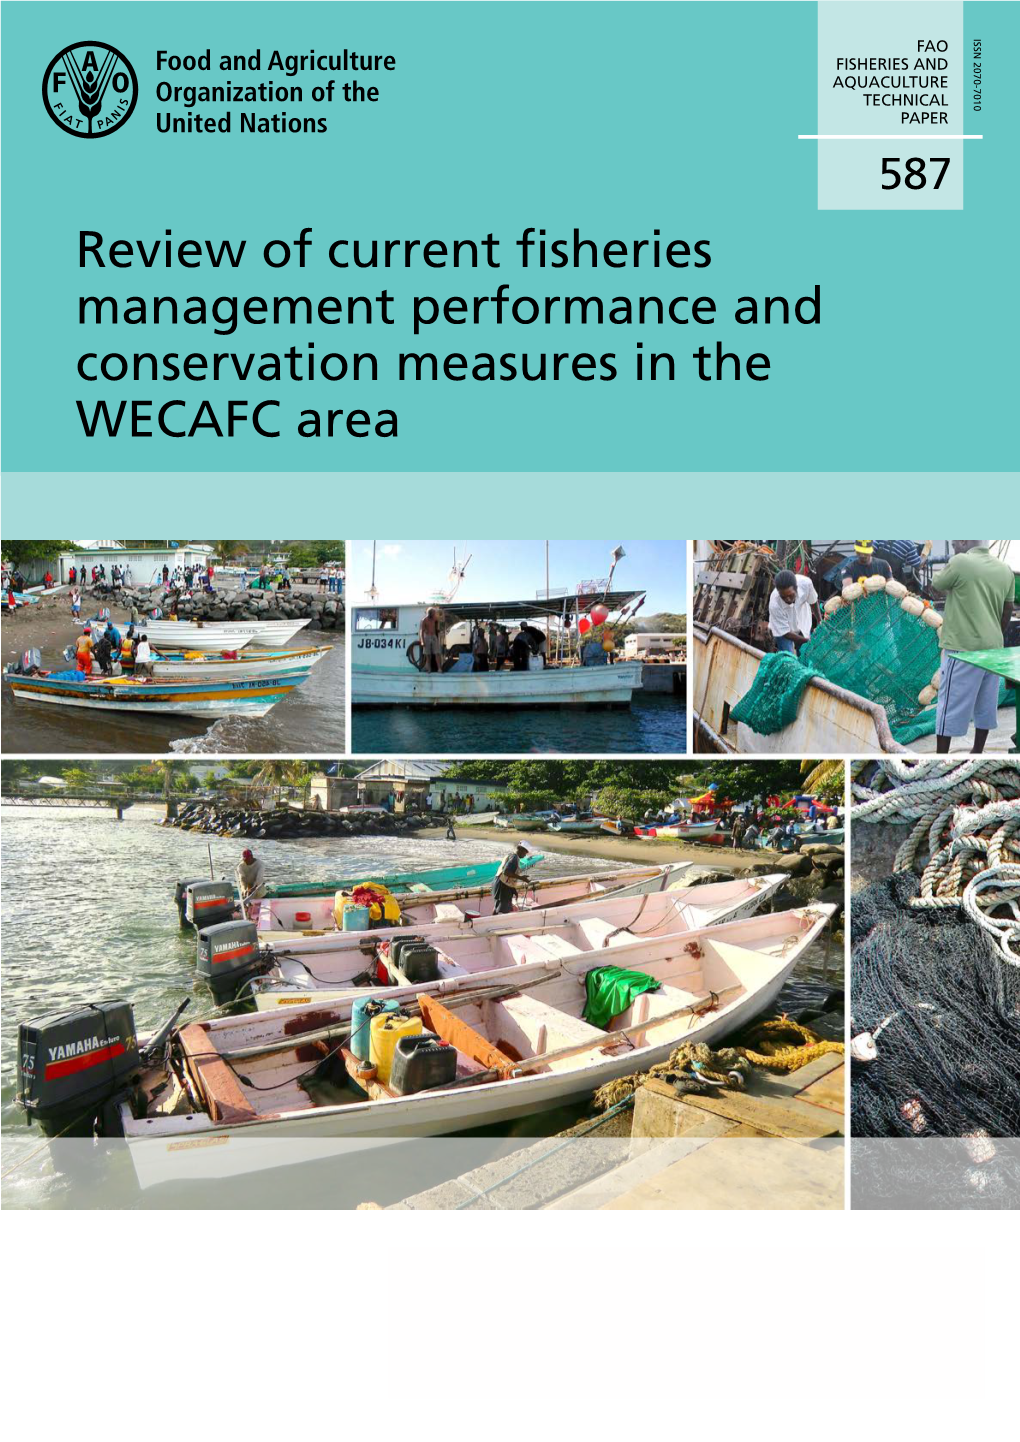 Review of Current Fisheries Management Performance and Conservation Measures in the WECAFC Area